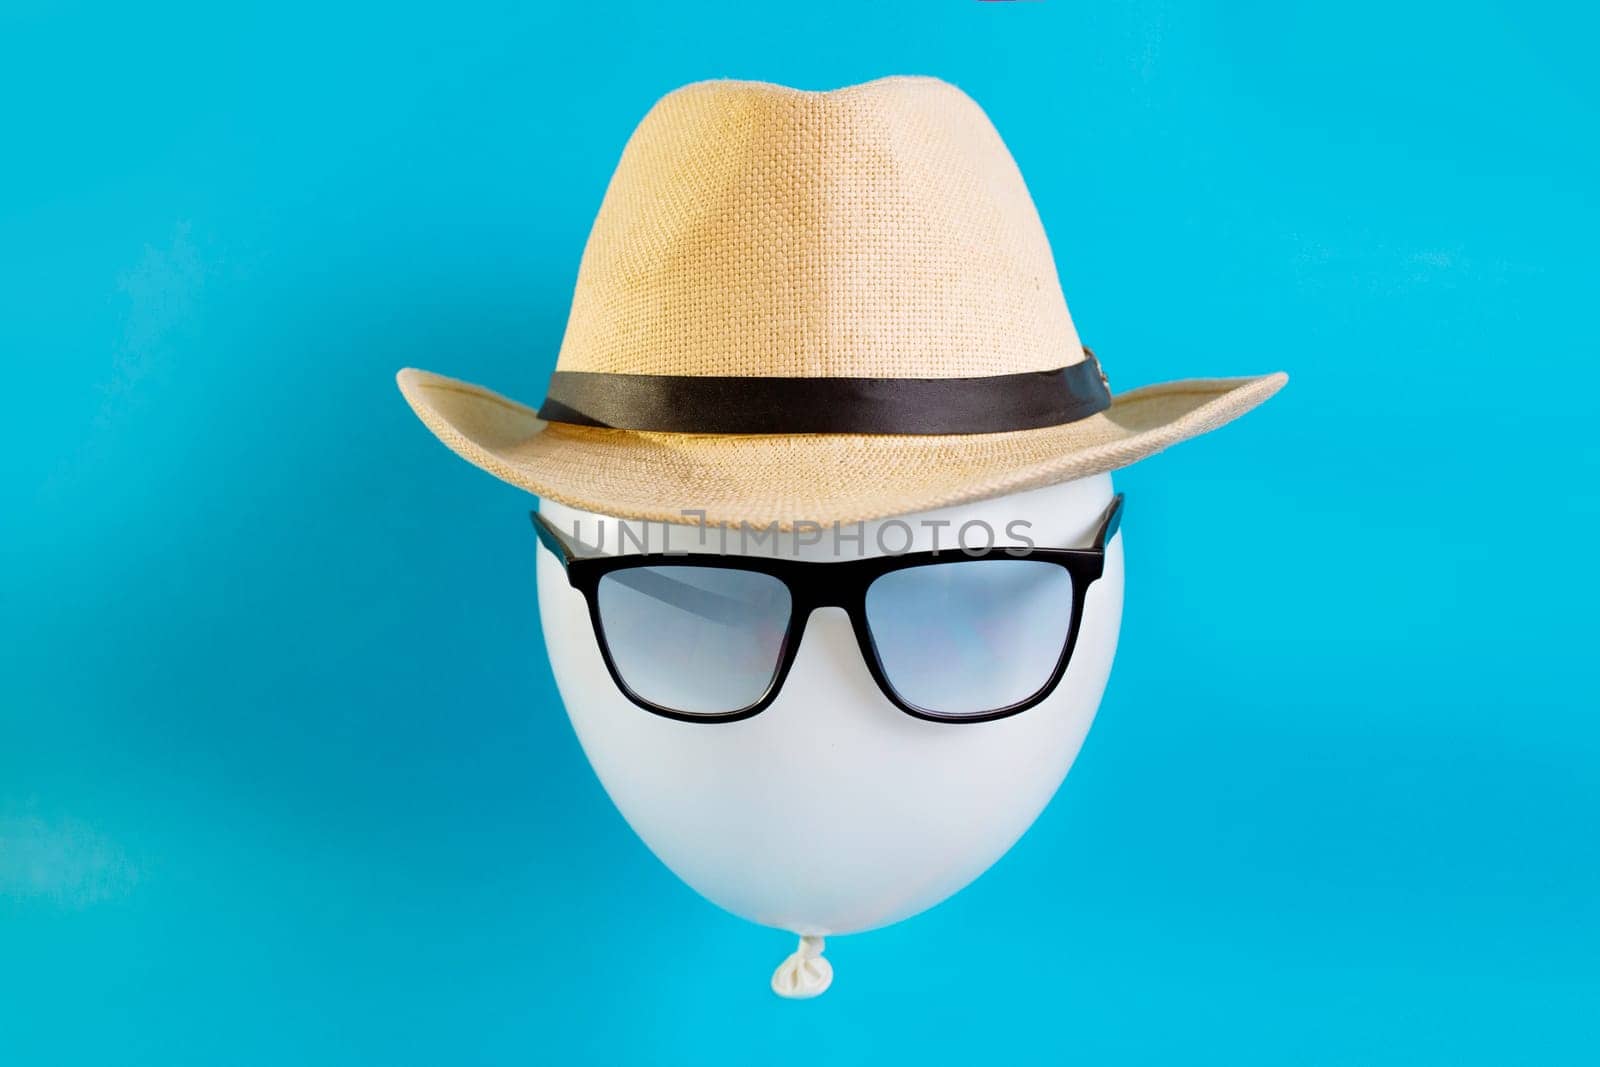 Balloon tourist close-up. The image of a male traveler in a hat and sunglasses concept tourist destination.